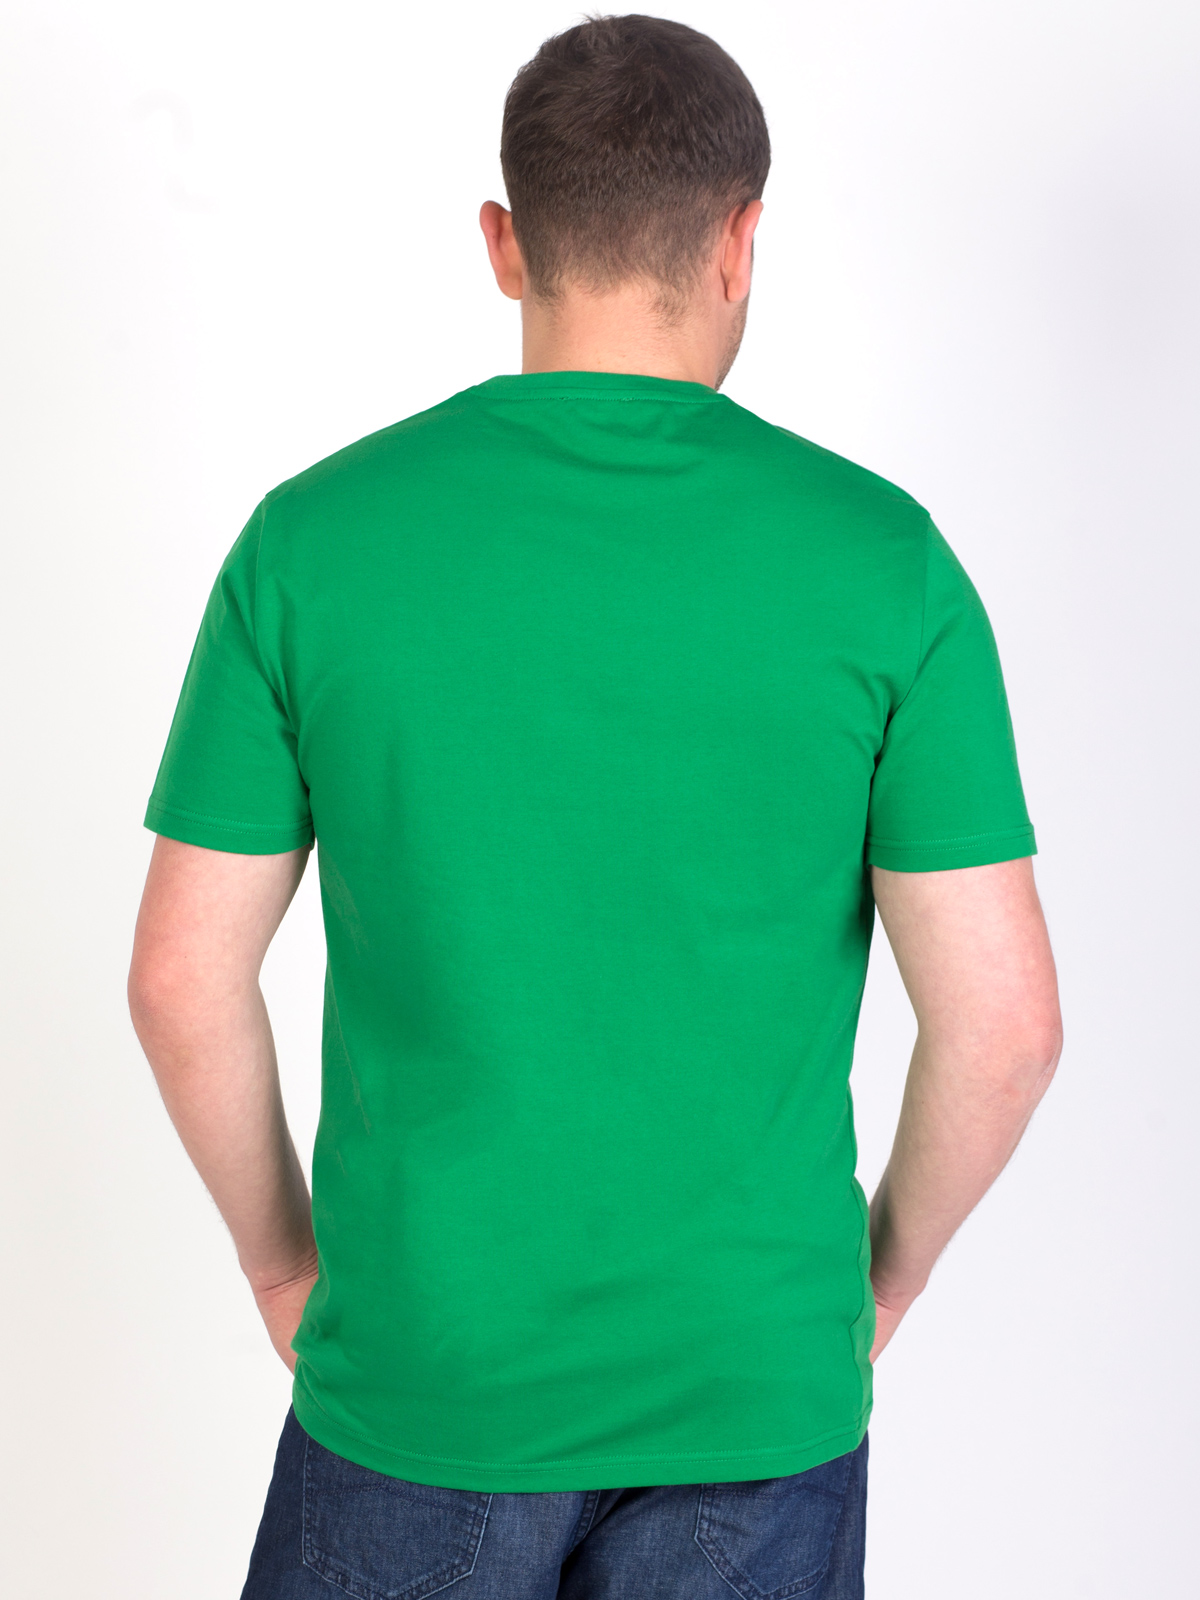 Tshirt in bright green with a print - 96429 € 16.31 img4